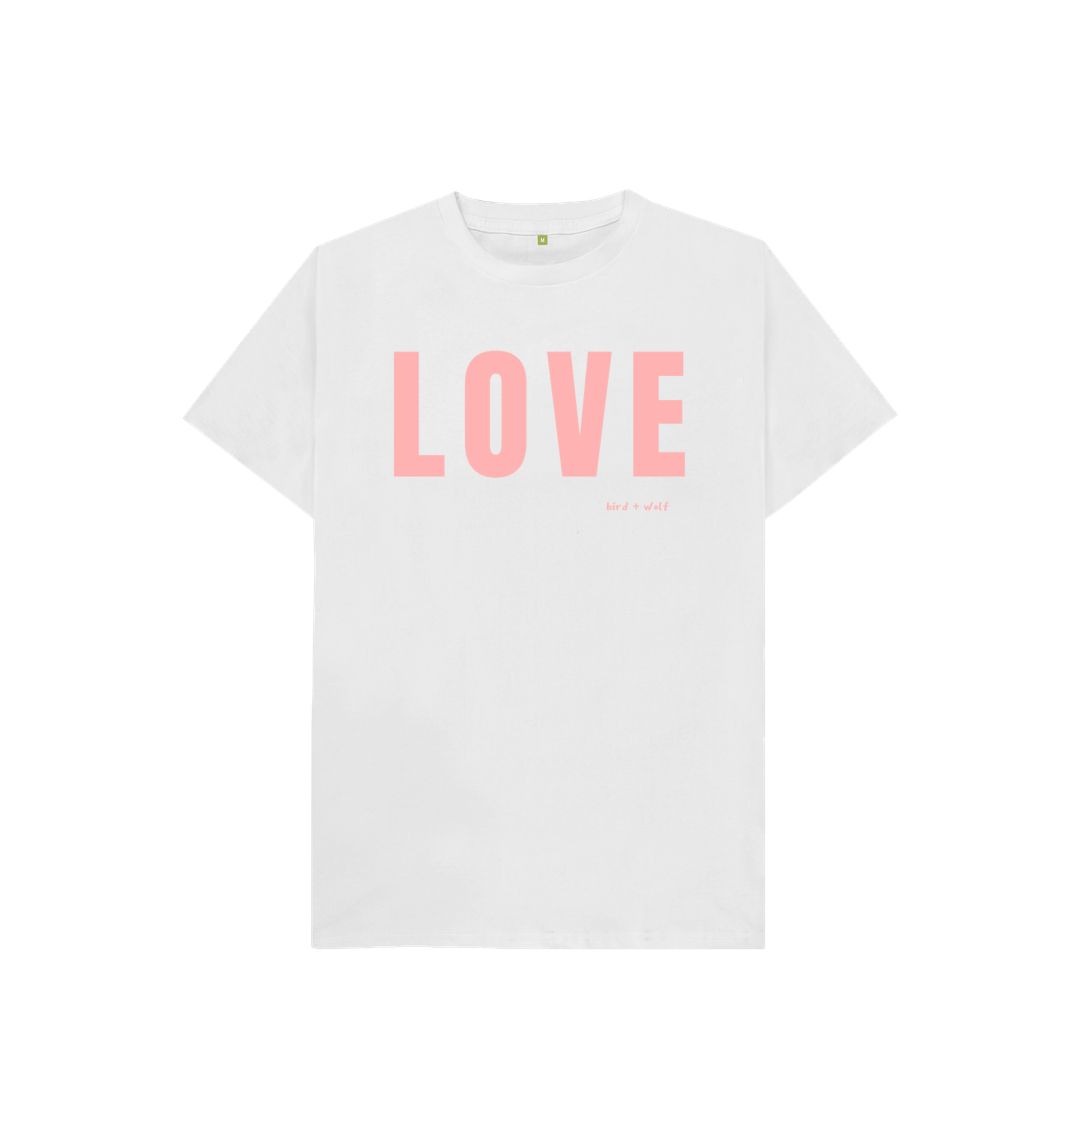 White Love Kids Tee (Pink lettering)